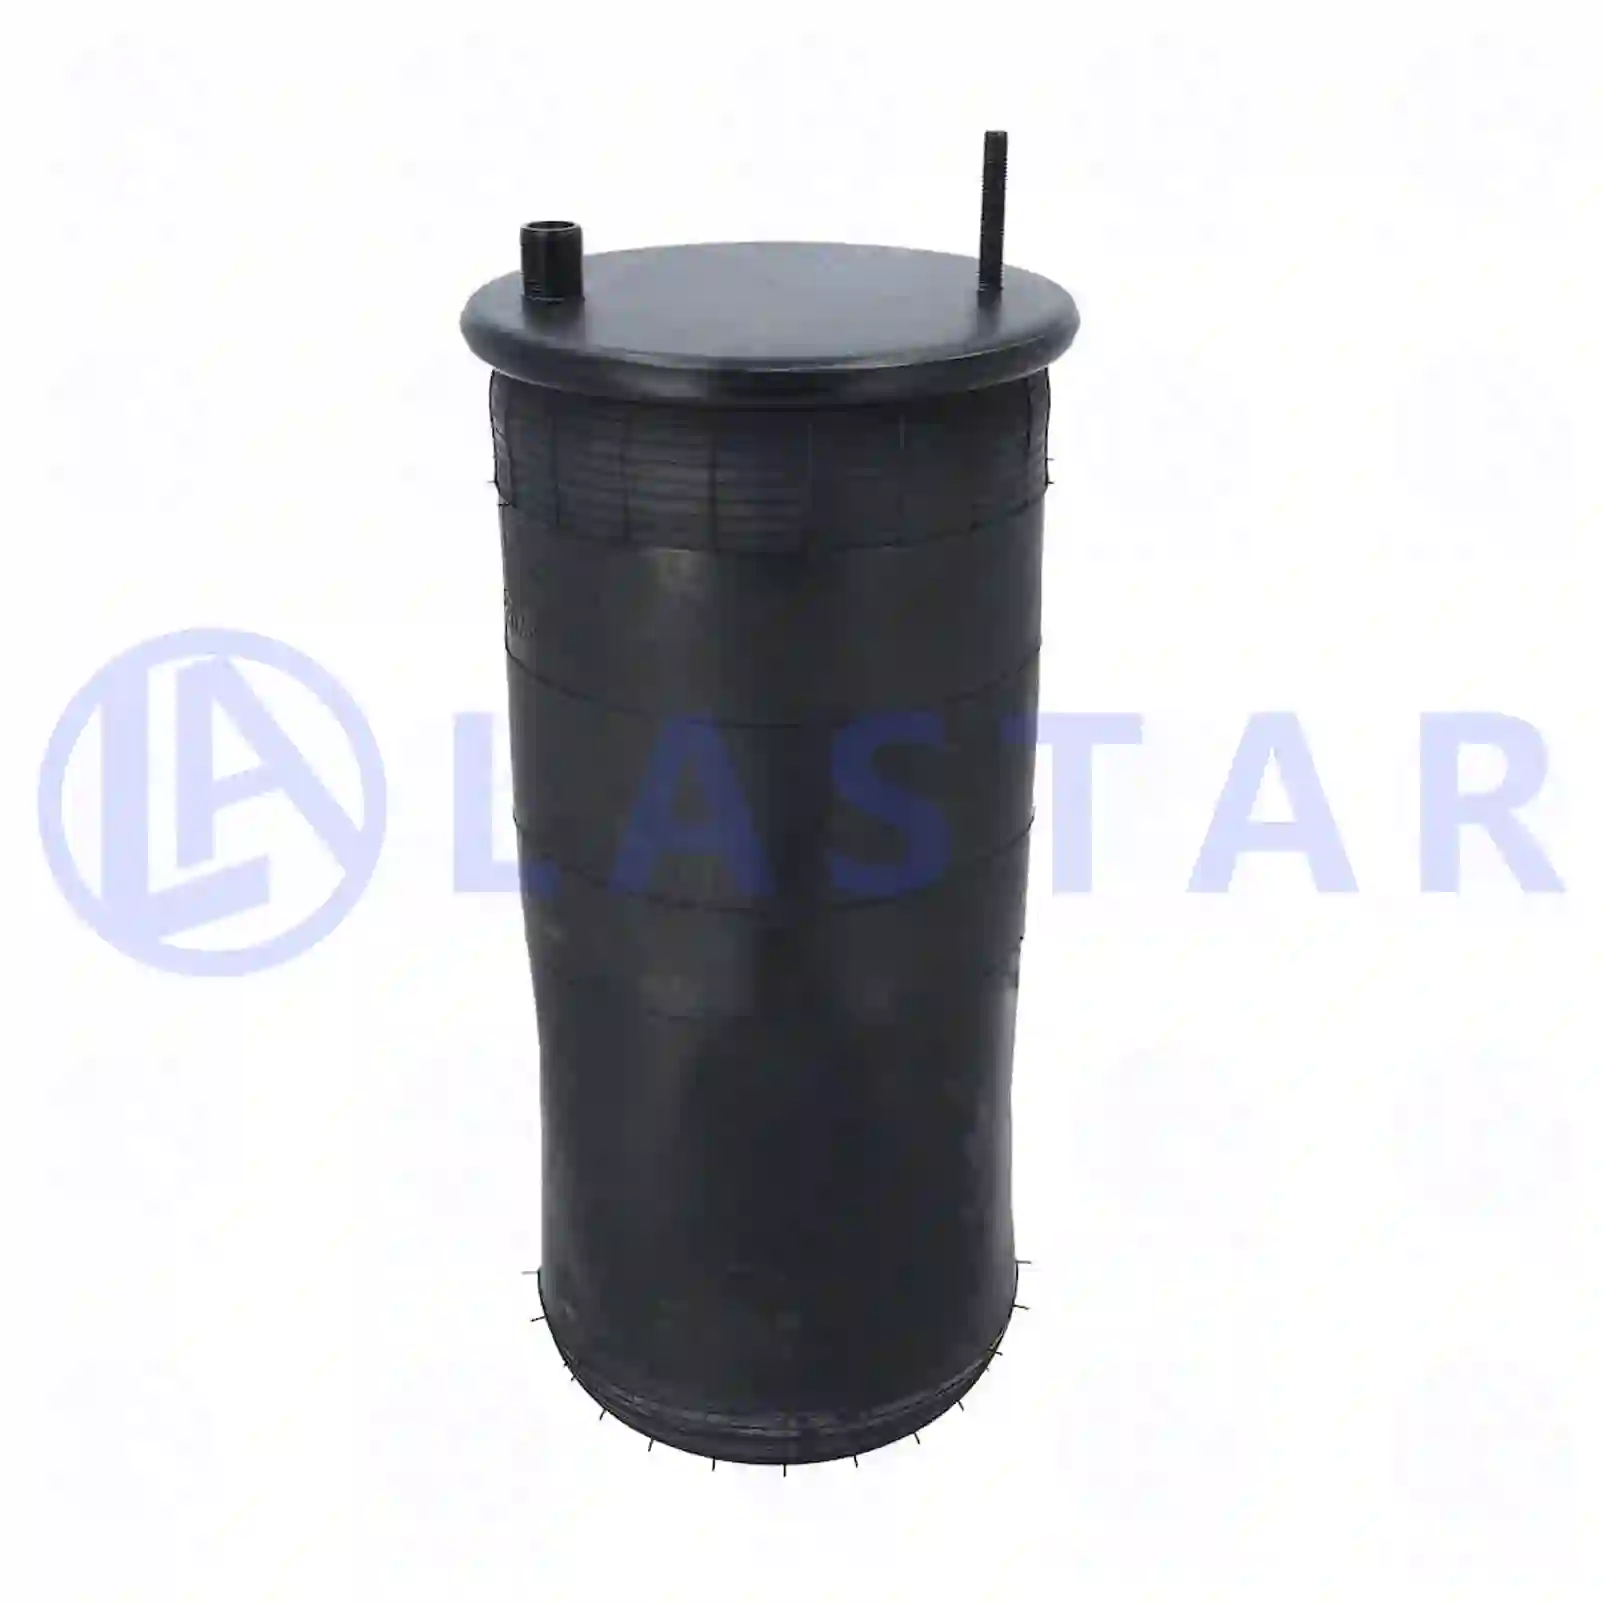 Air spring, with steel piston, 77729678, 21224749, ZG40768-0008 ||  77729678 Lastar Spare Part | Truck Spare Parts, Auotomotive Spare Parts Air spring, with steel piston, 77729678, 21224749, ZG40768-0008 ||  77729678 Lastar Spare Part | Truck Spare Parts, Auotomotive Spare Parts